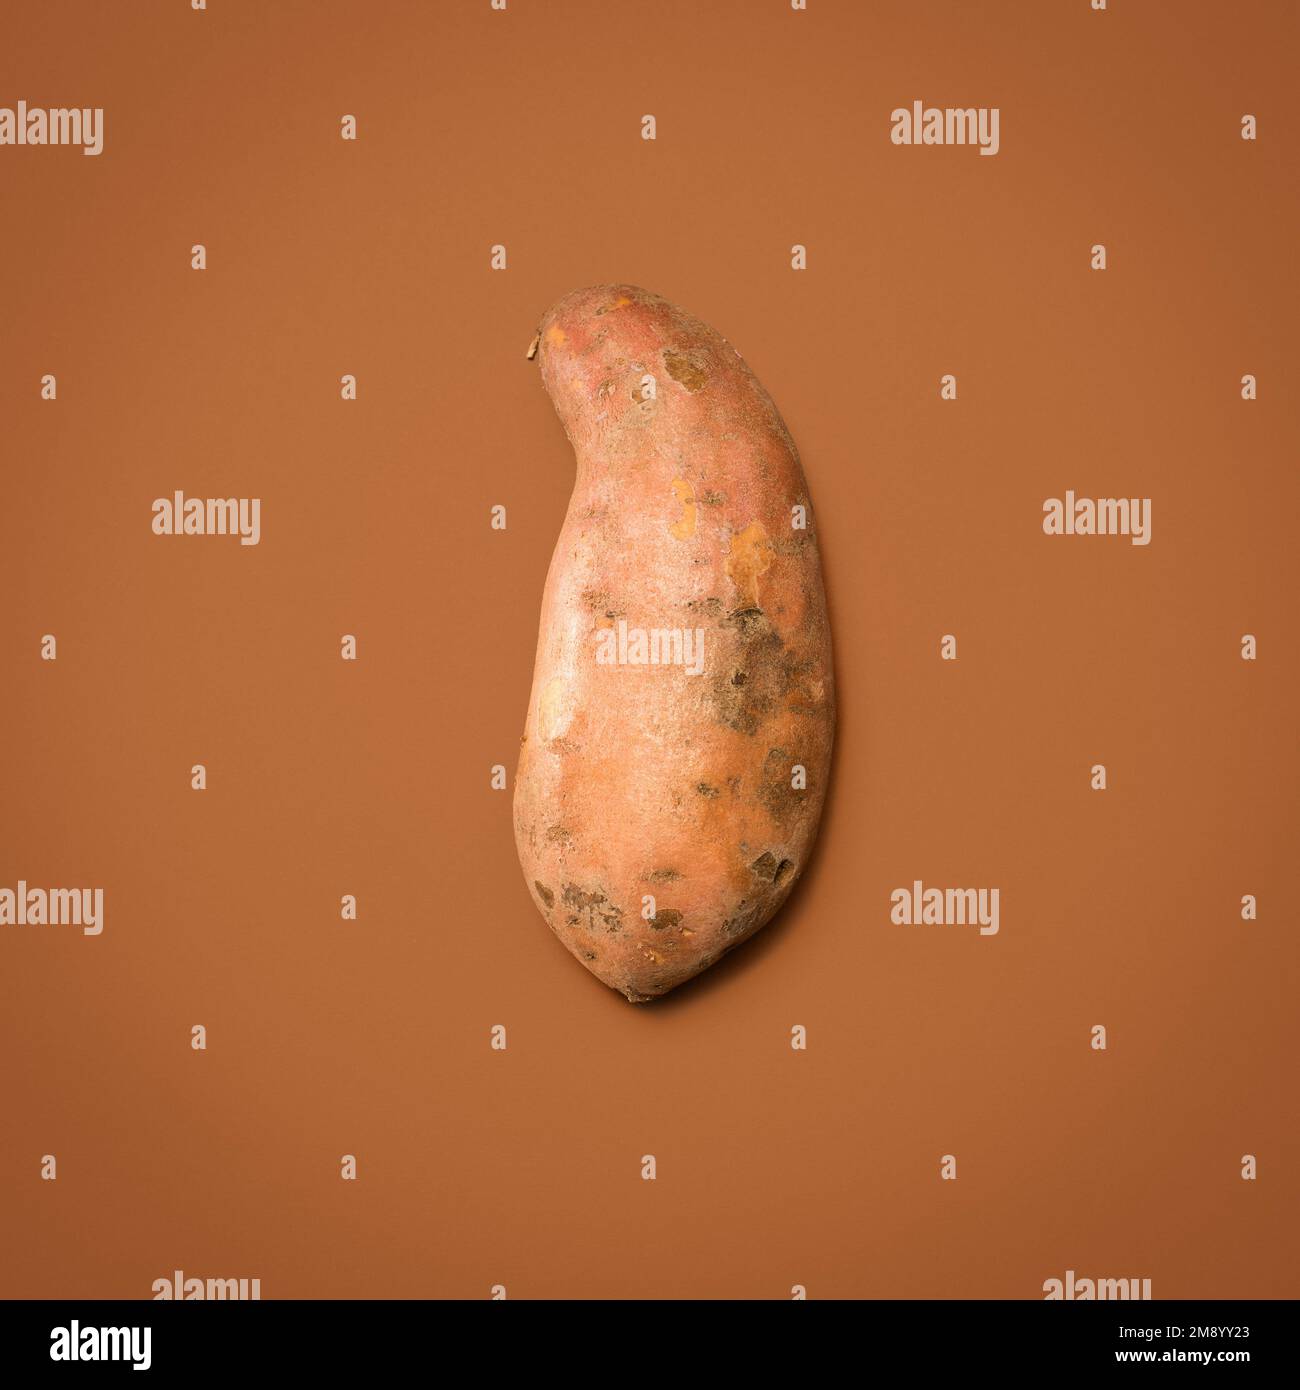 The sweetest treats can be found in the earth. a sweet potato against a studio background. Stock Photo